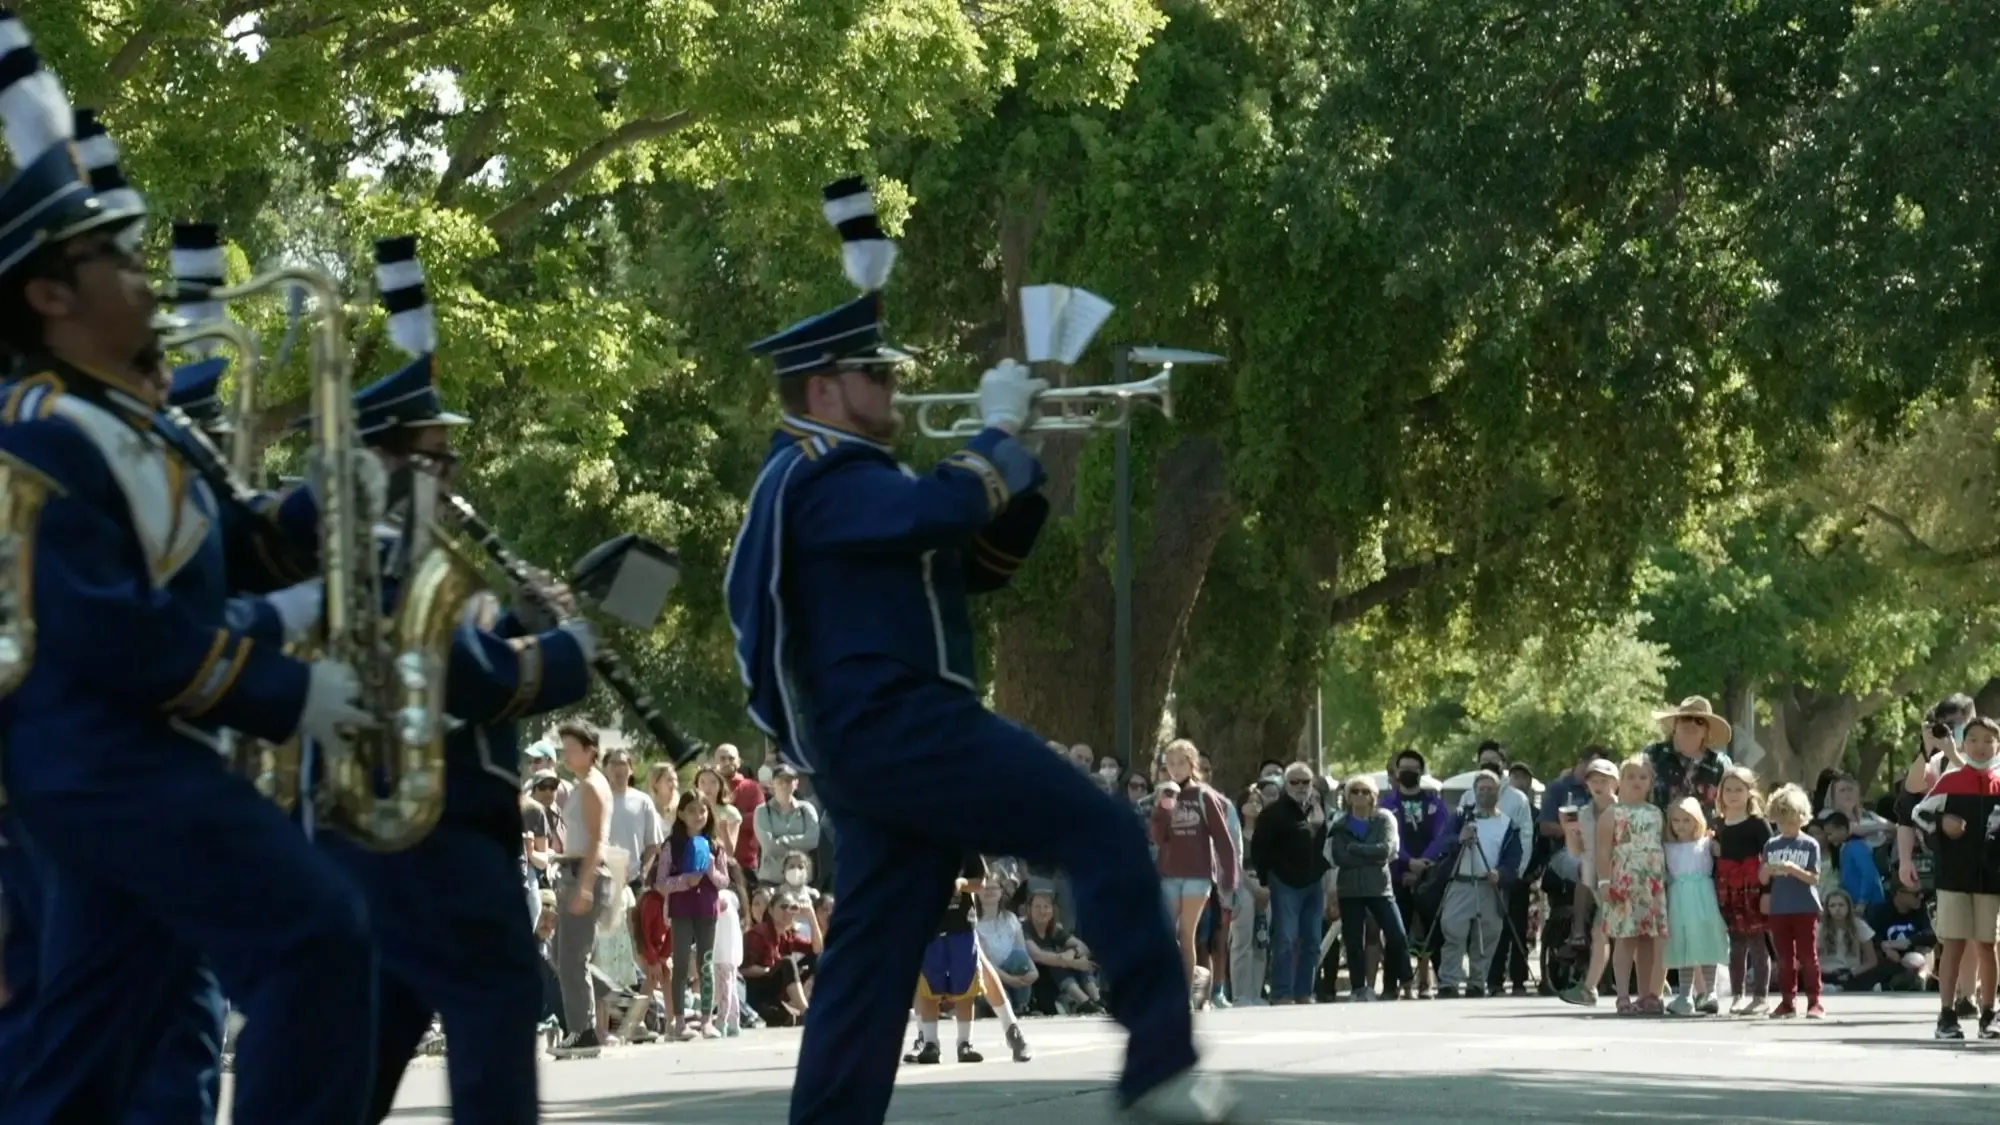 UC Davis marching band marching in the Picnic Day Parade